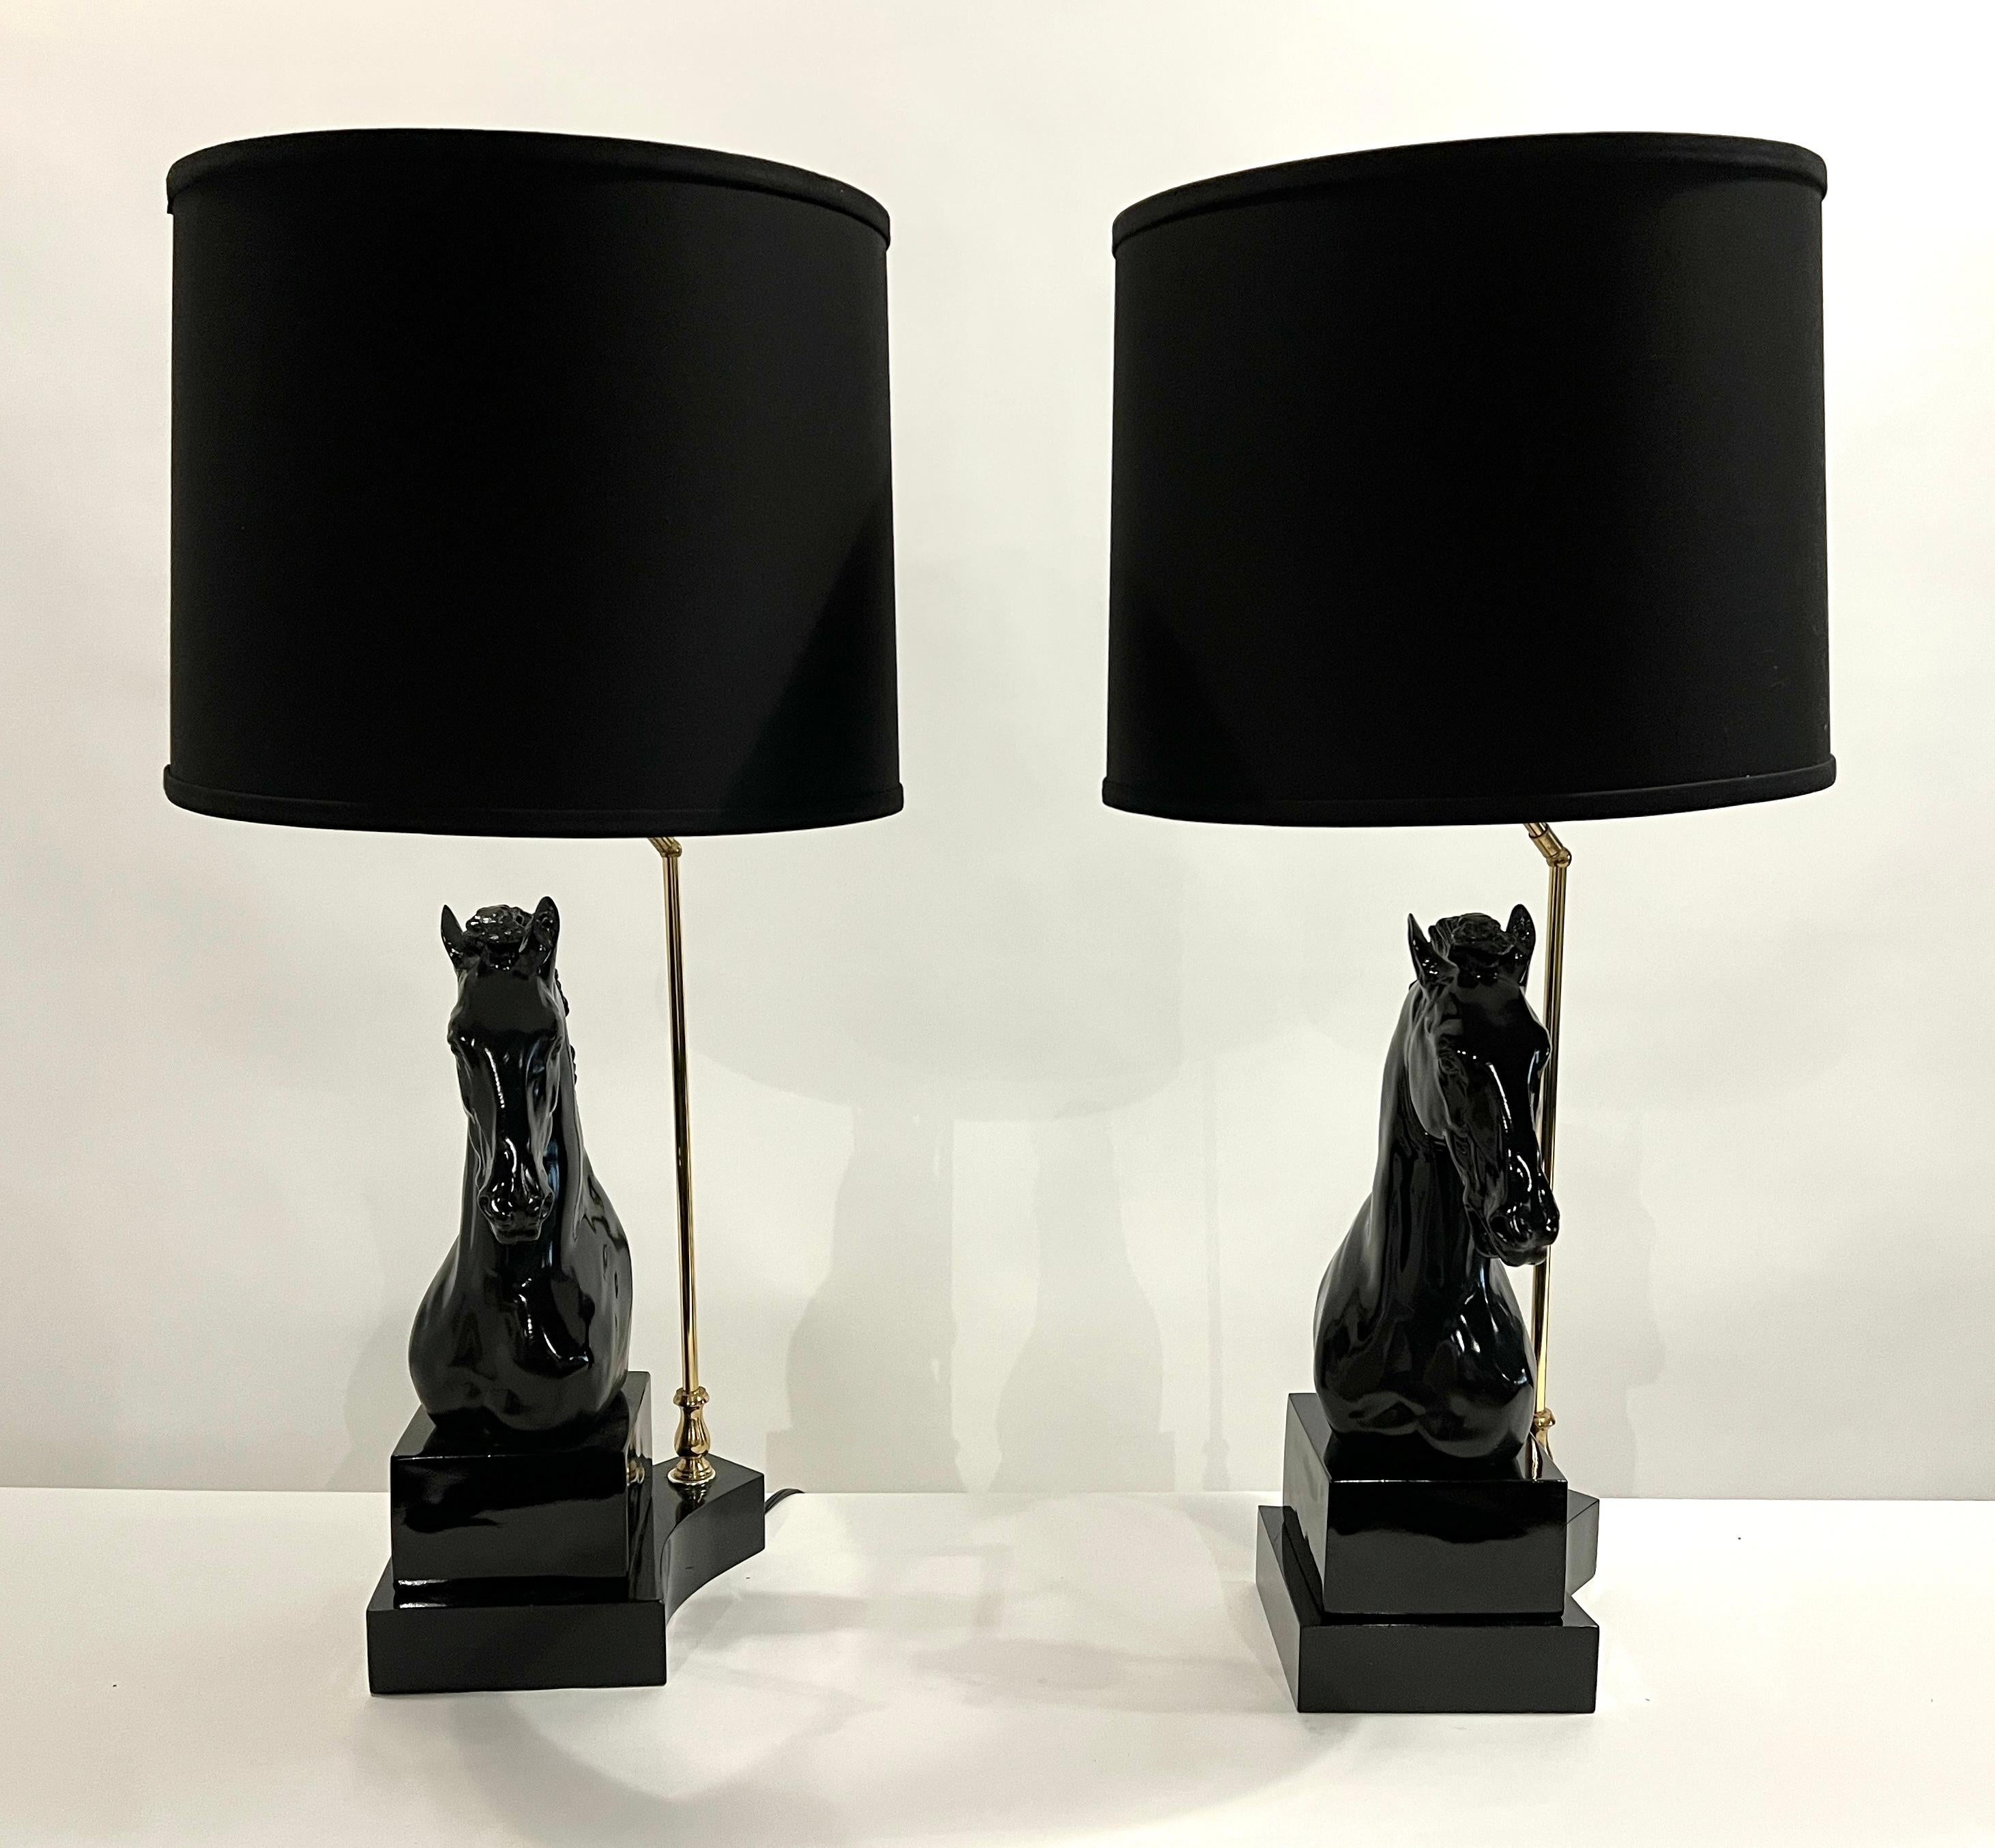 Hollywood Regency style horse head lamps in high glass black lacquer on wood plinths with brass accents. 